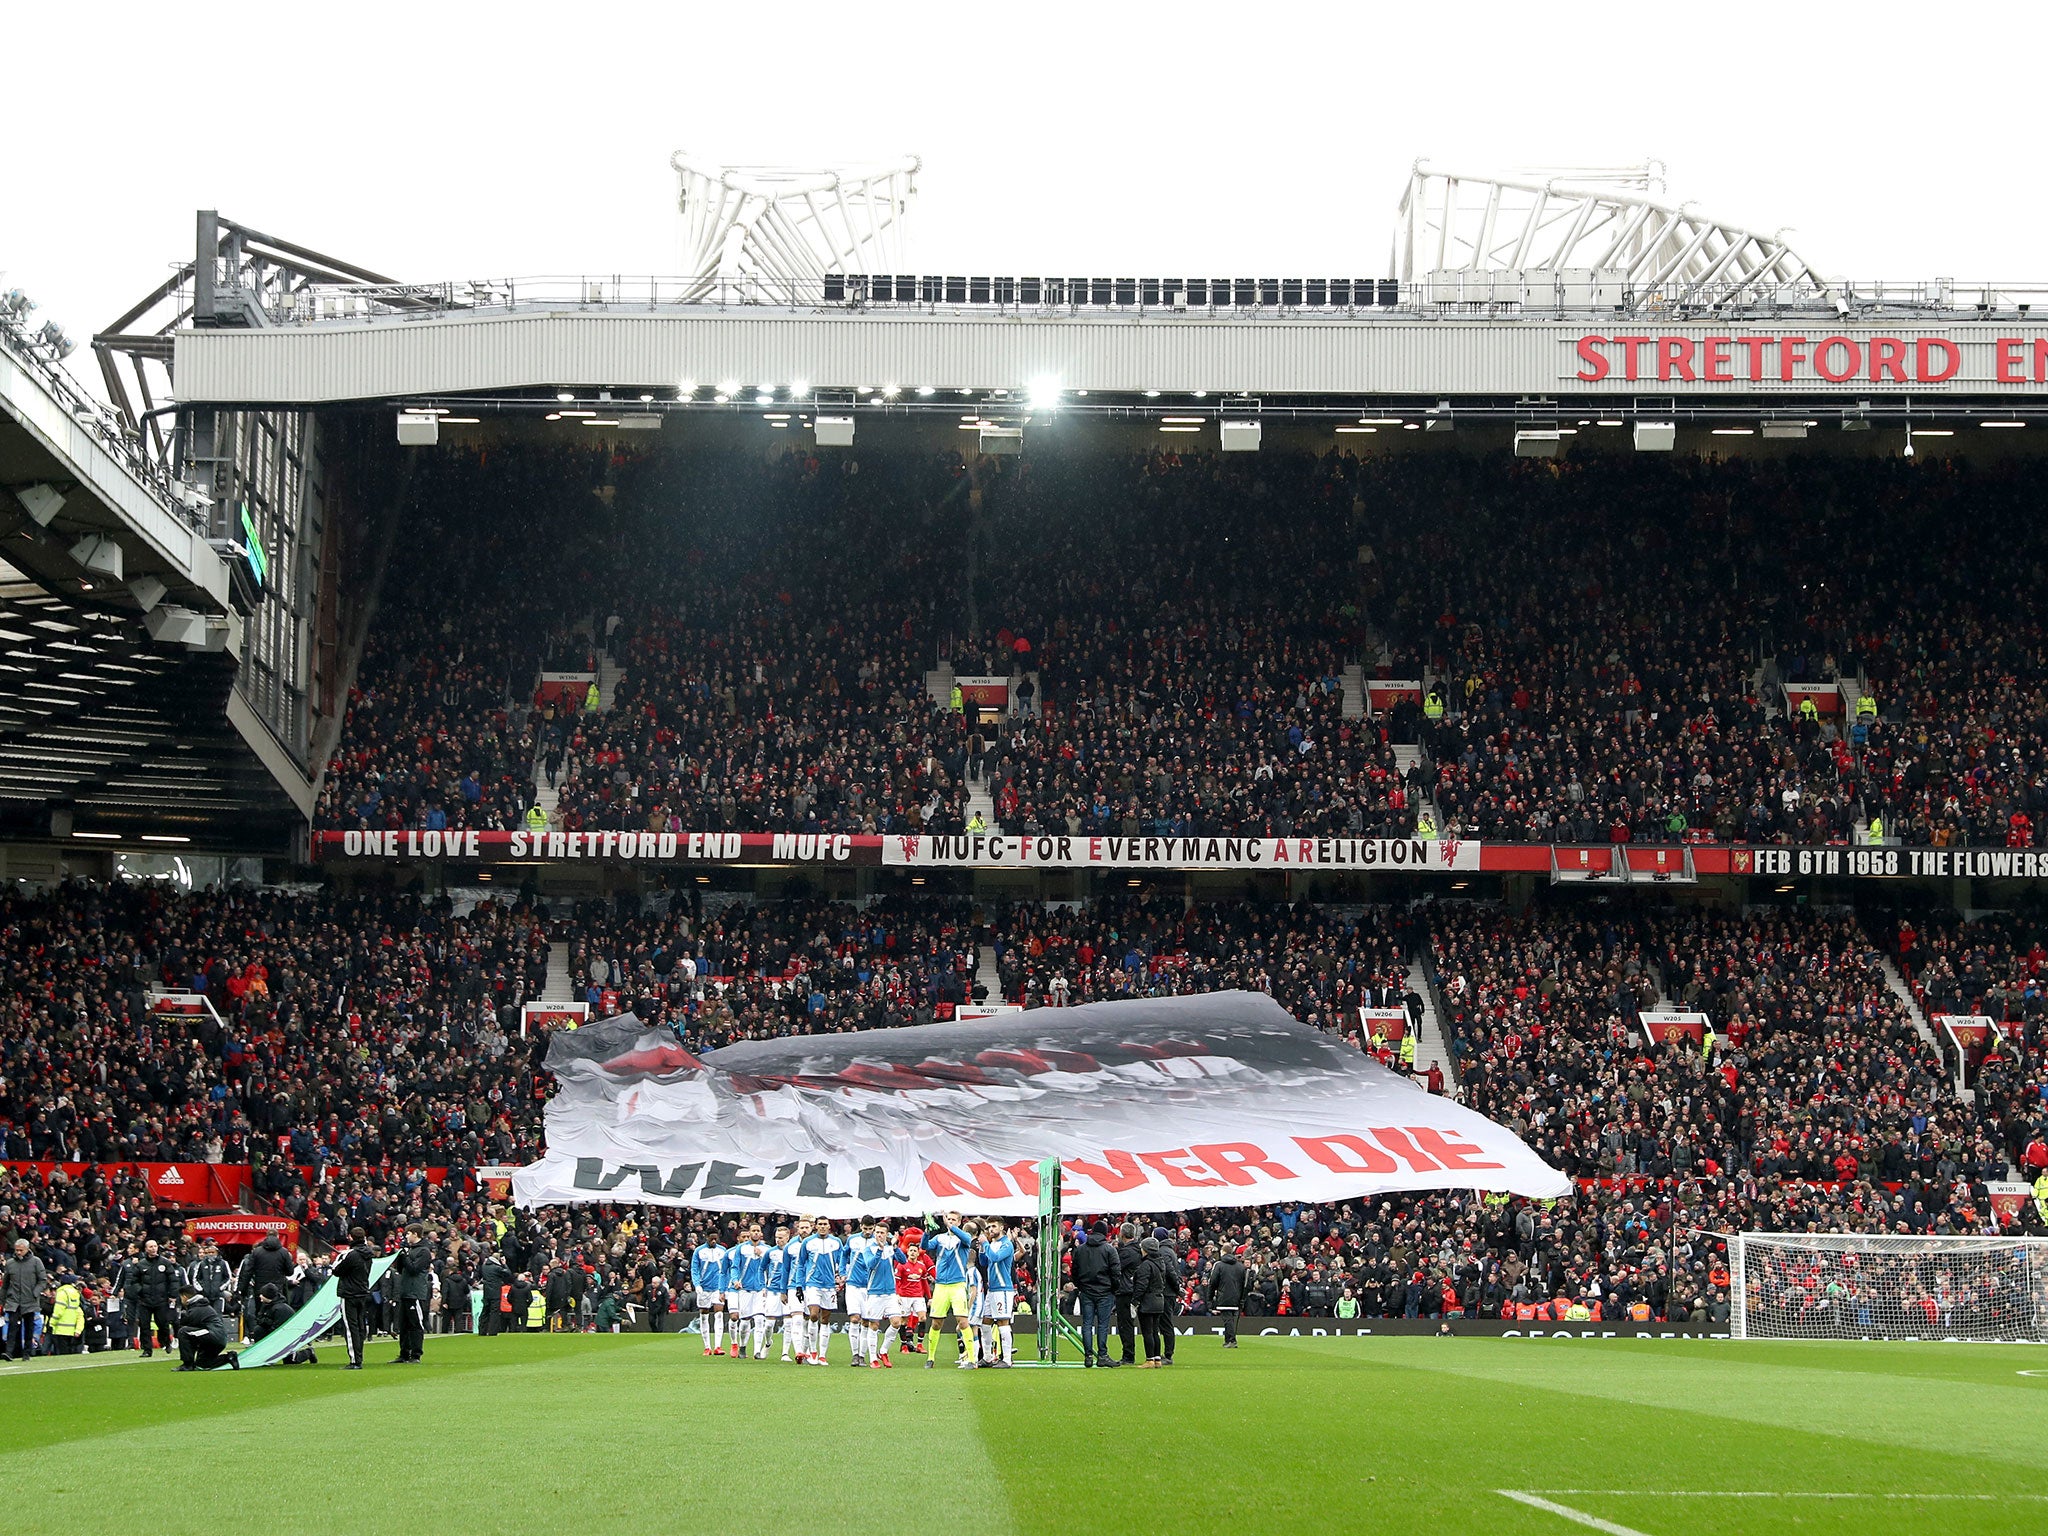 Old Trafford paid its respects to the Busby Babes 60 years on from the Munich air disaster